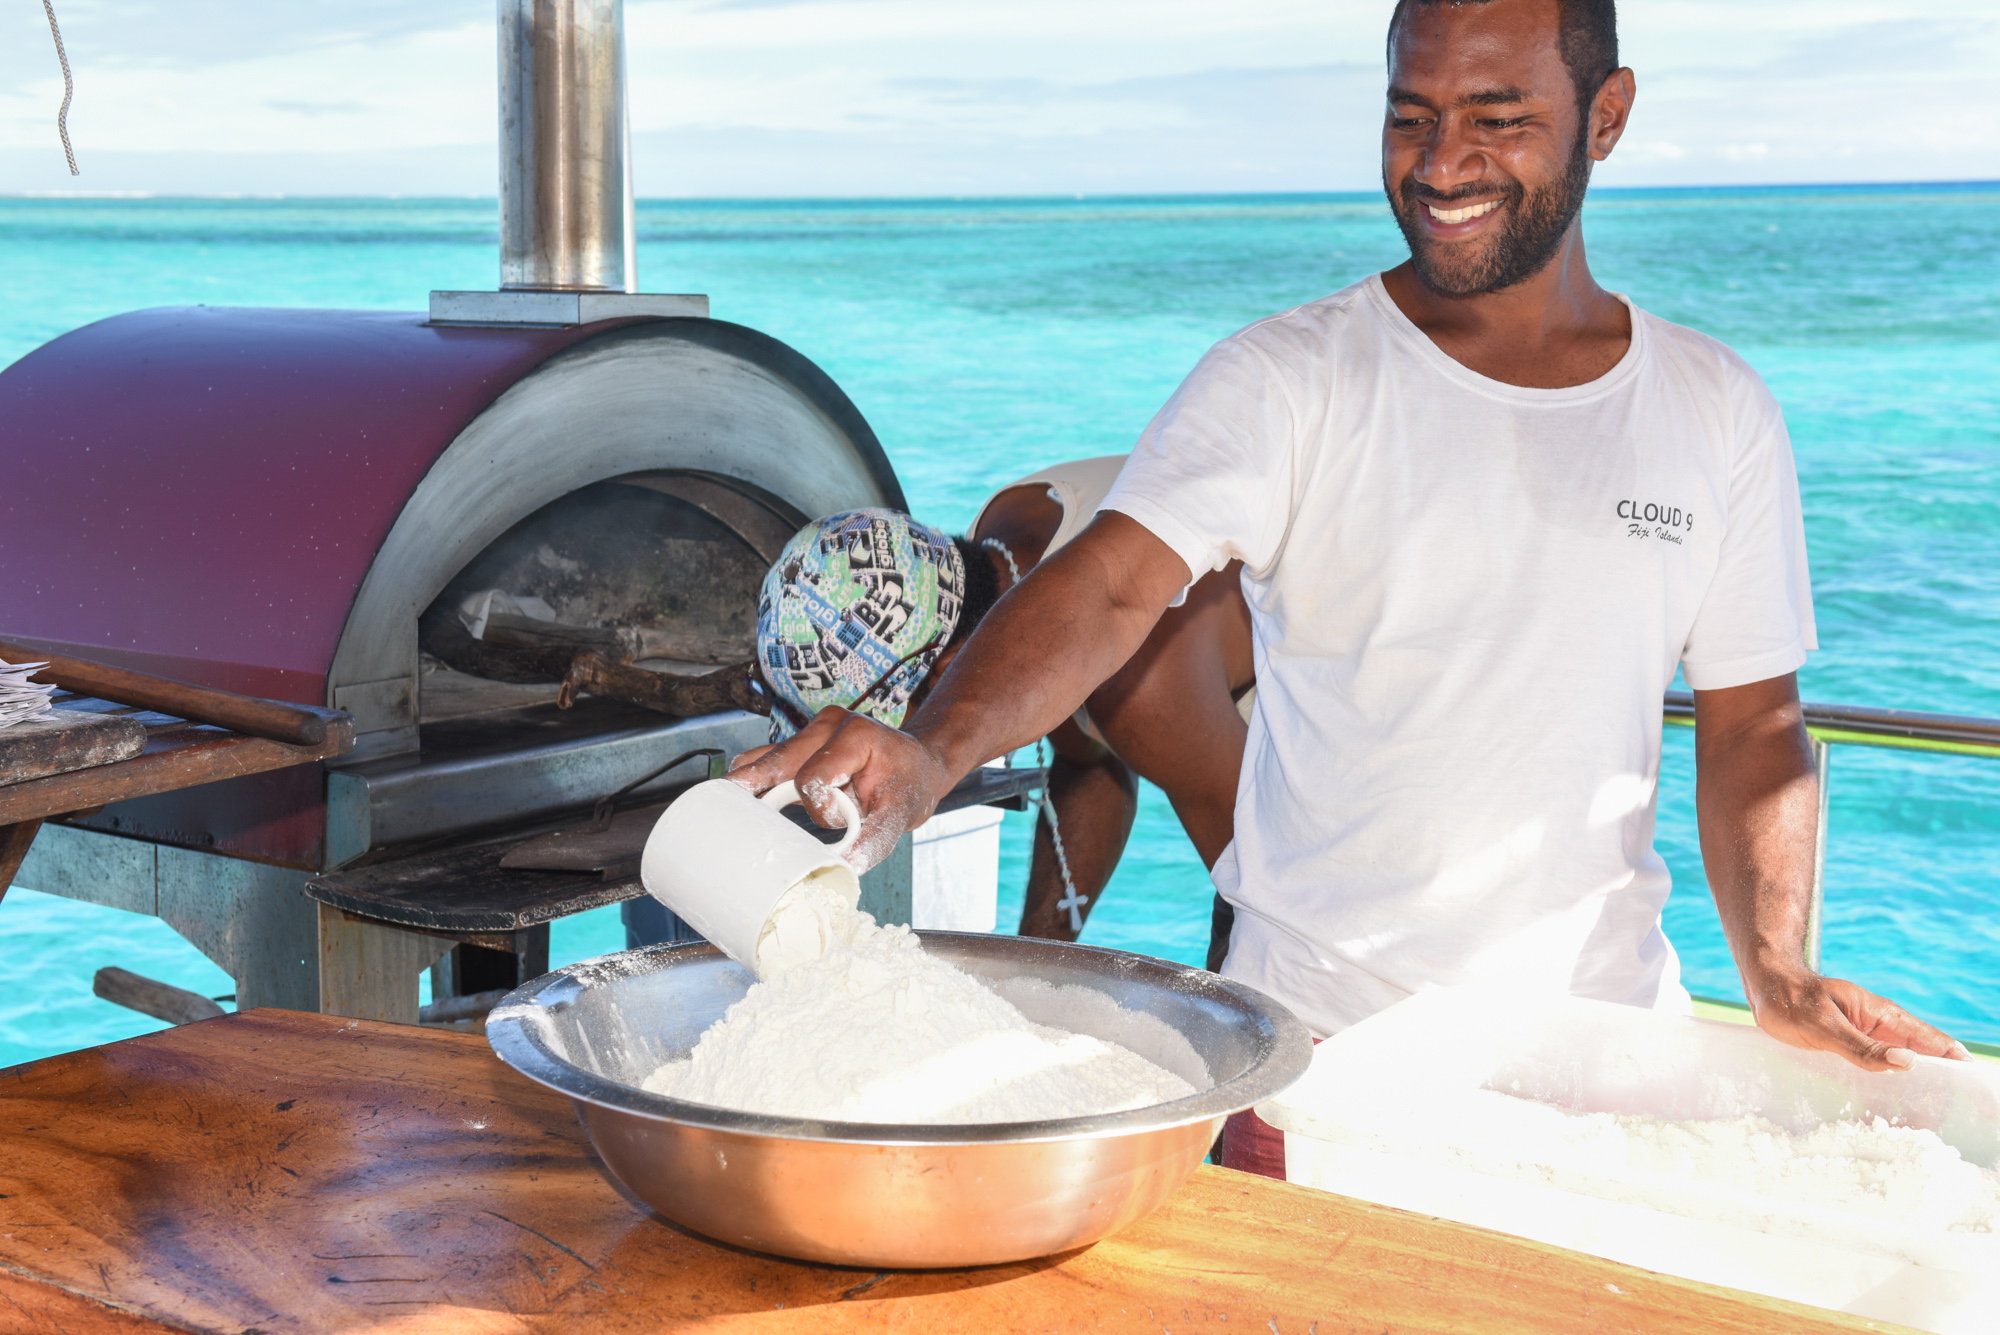 On the bar islnd a Cloud 9's member preparing the flour for the pizza dough with turquoise sea in the background